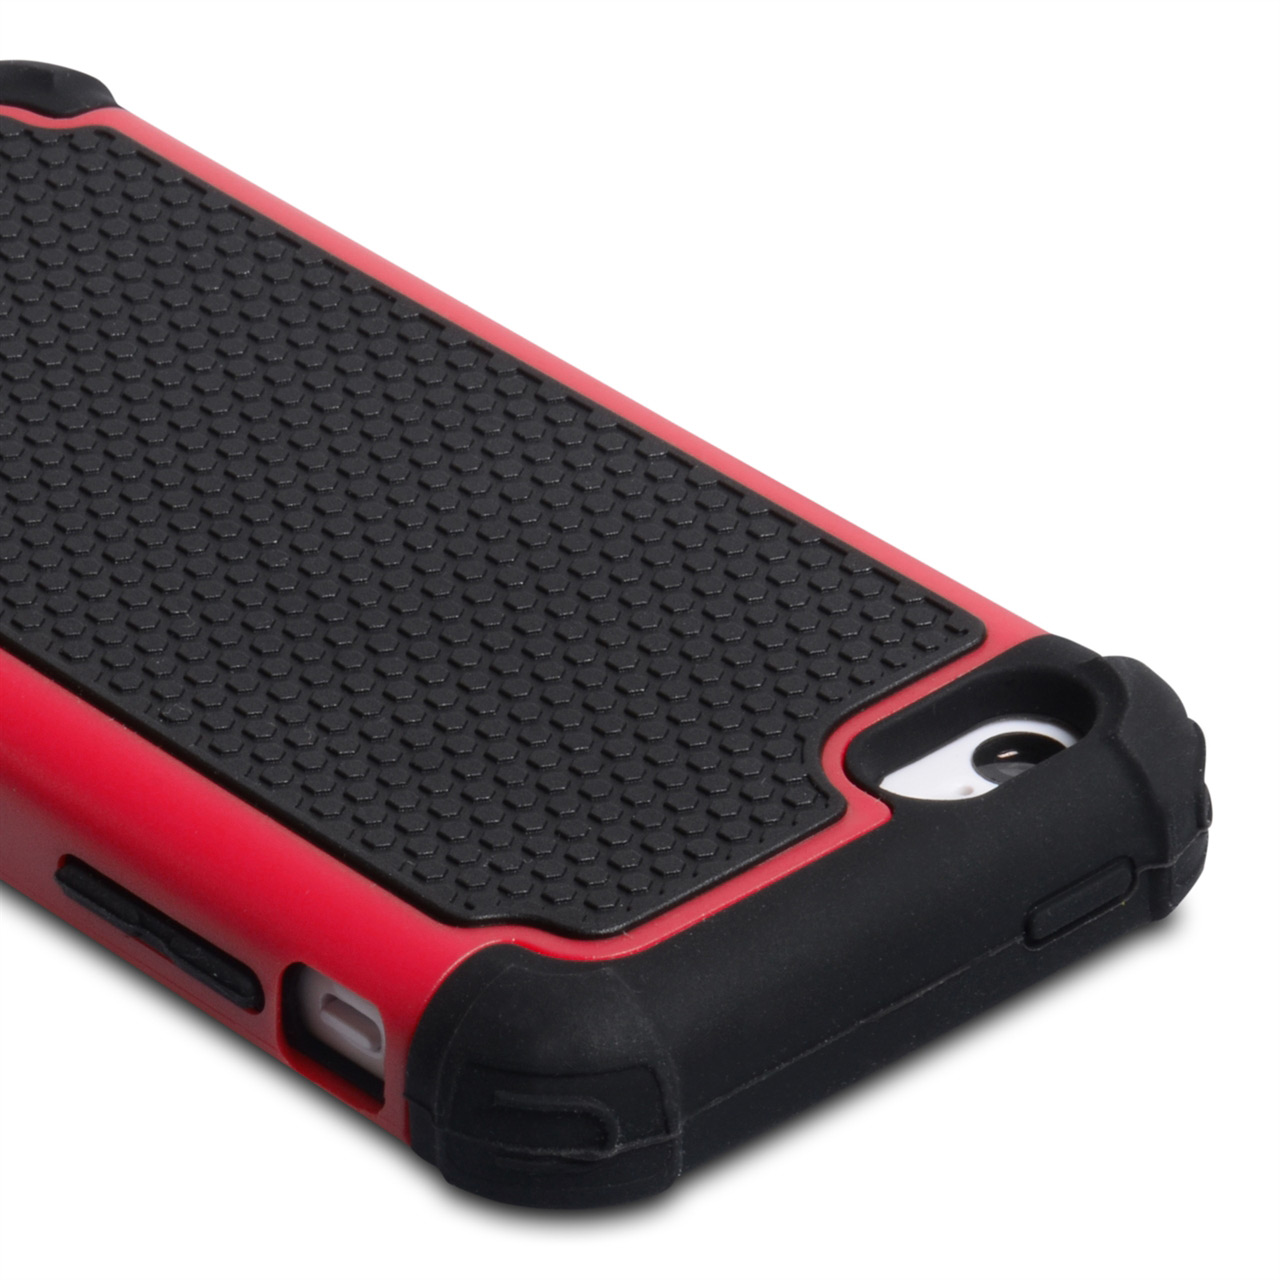 YouSave Accessories iPhone 5C Grip Combo Case - Red